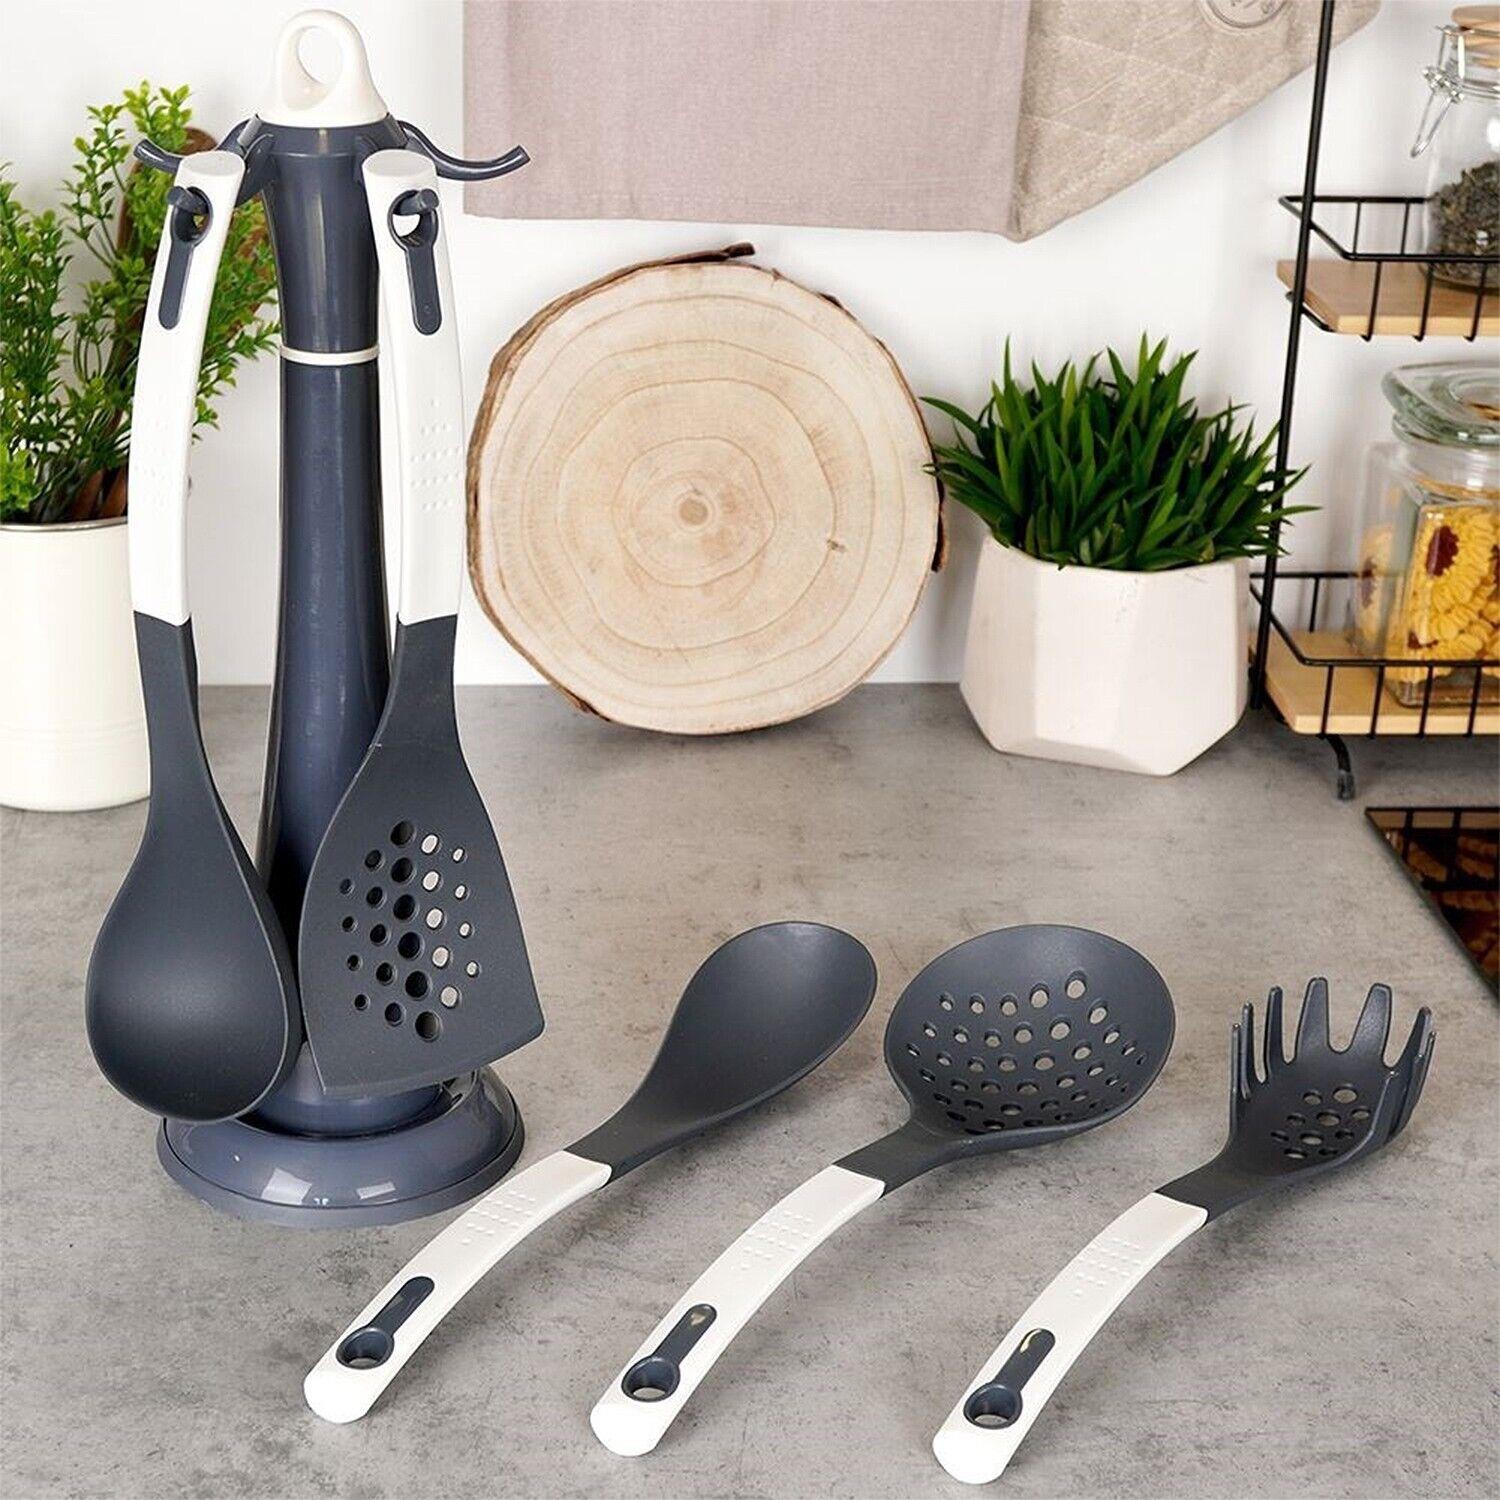 6 Pcs Kitchen Tool Set with a Stand by GEEZY - The Magic Toy Shop